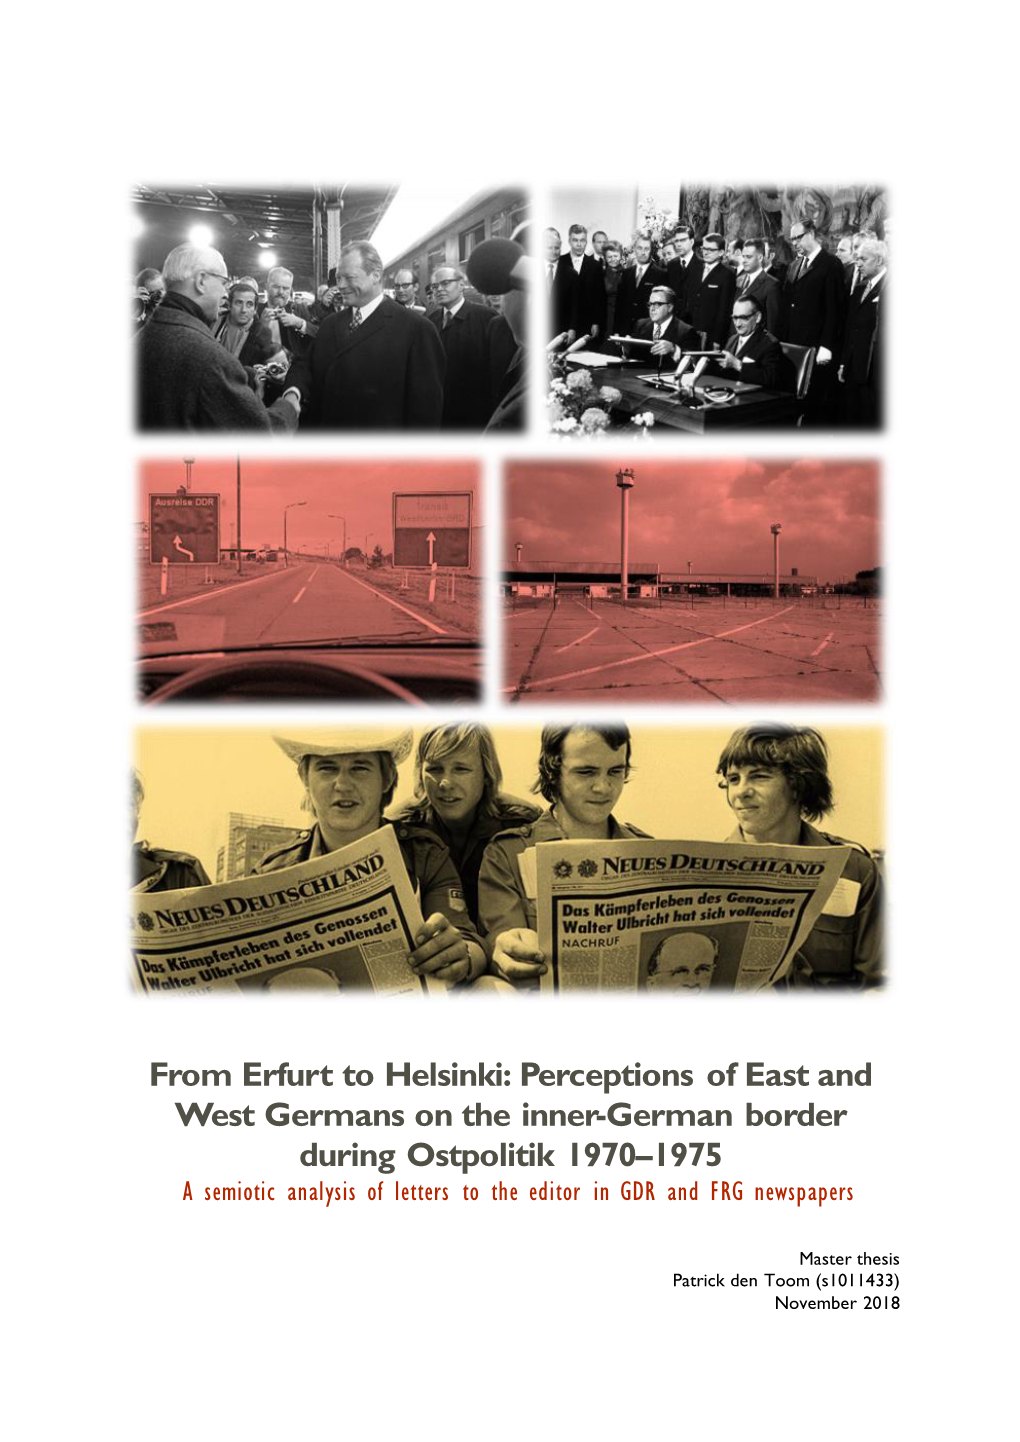 From Erfurt to Helsinki: Perceptions of East and West Germans on The